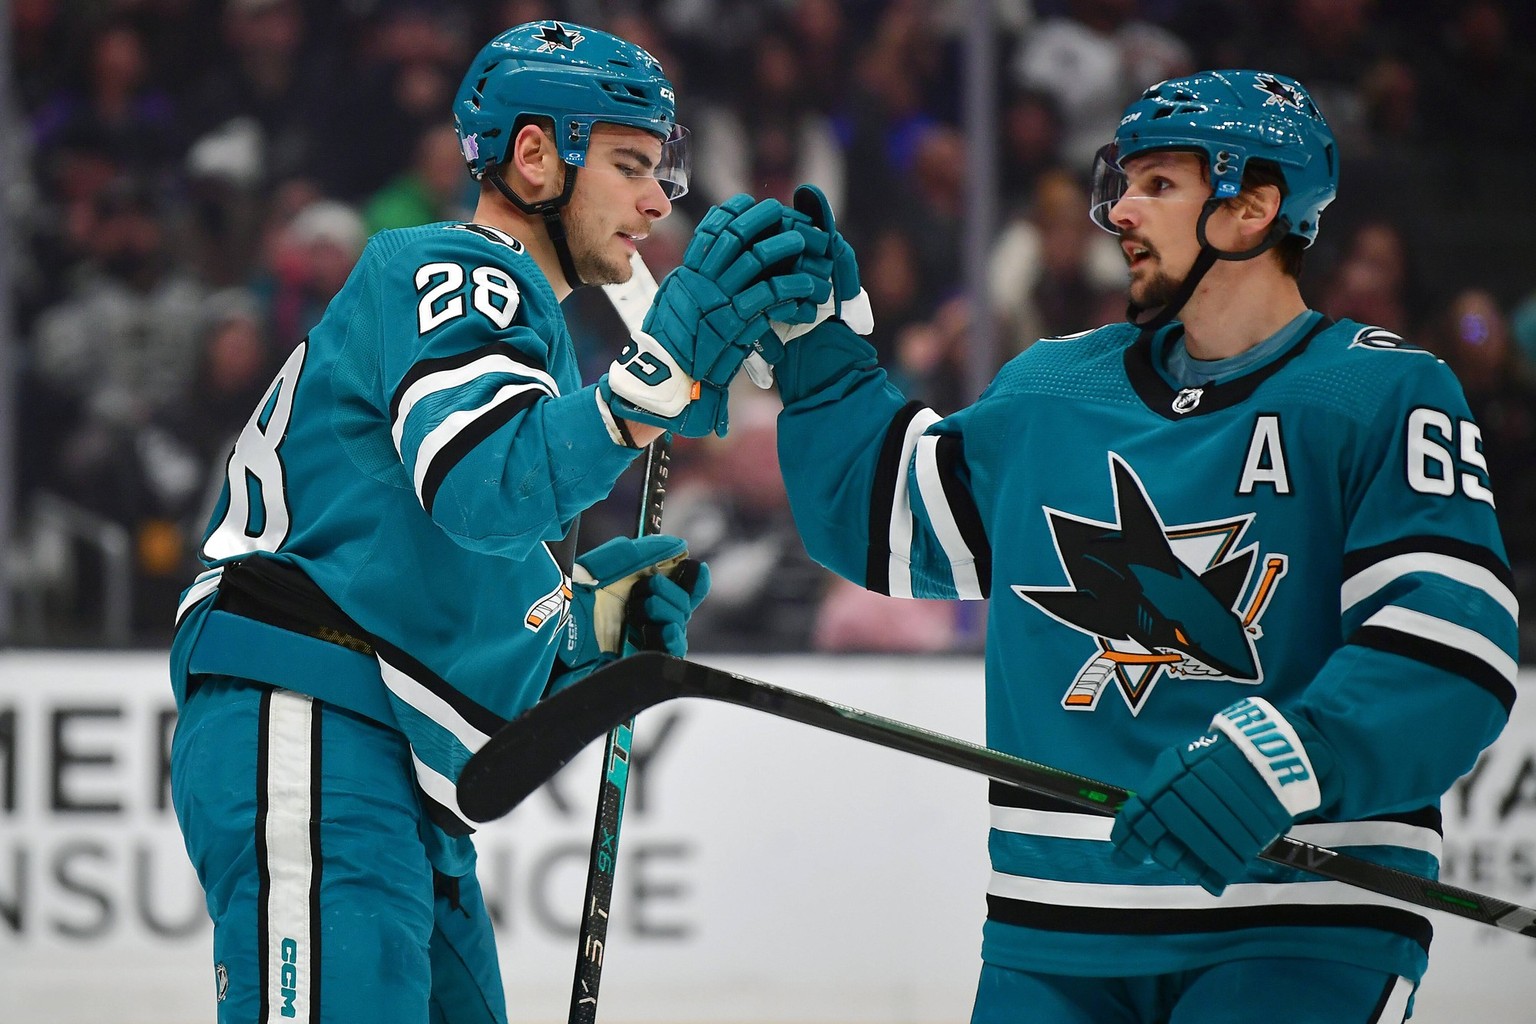 NHL, Eishockey Herren, USA San Jose Sharks at Los Angeles Kings Dec 17, 2022 Los Angeles, California, USA San Jose Sharks right wing Timo Meier 28 celebrates his power play goal scored against the Los ...